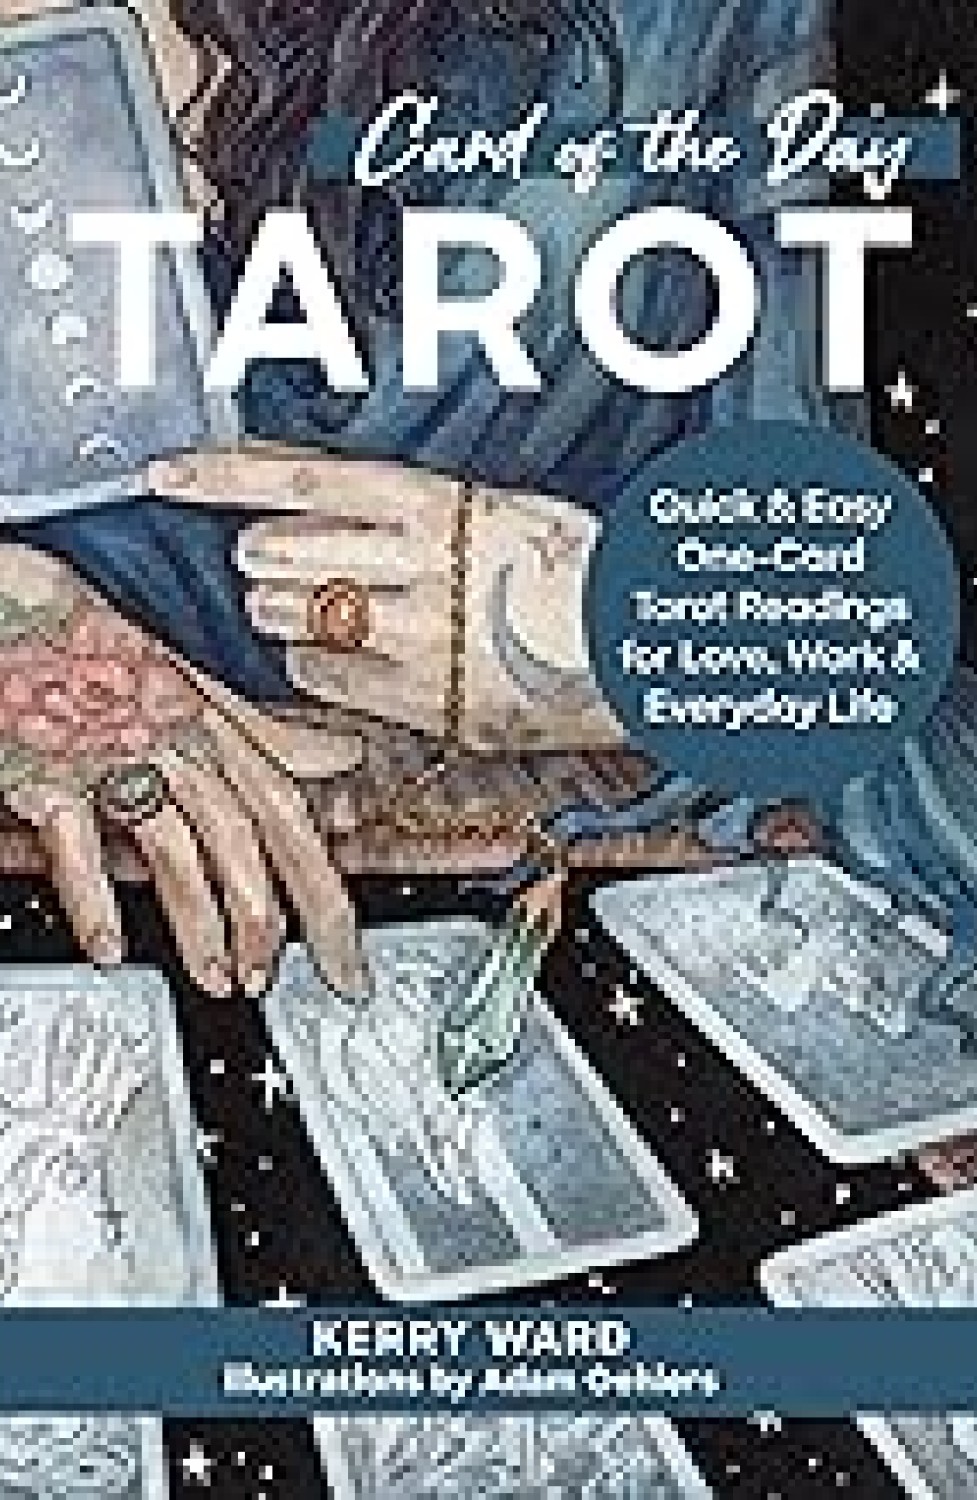 CARD OF THE DAY TAROT